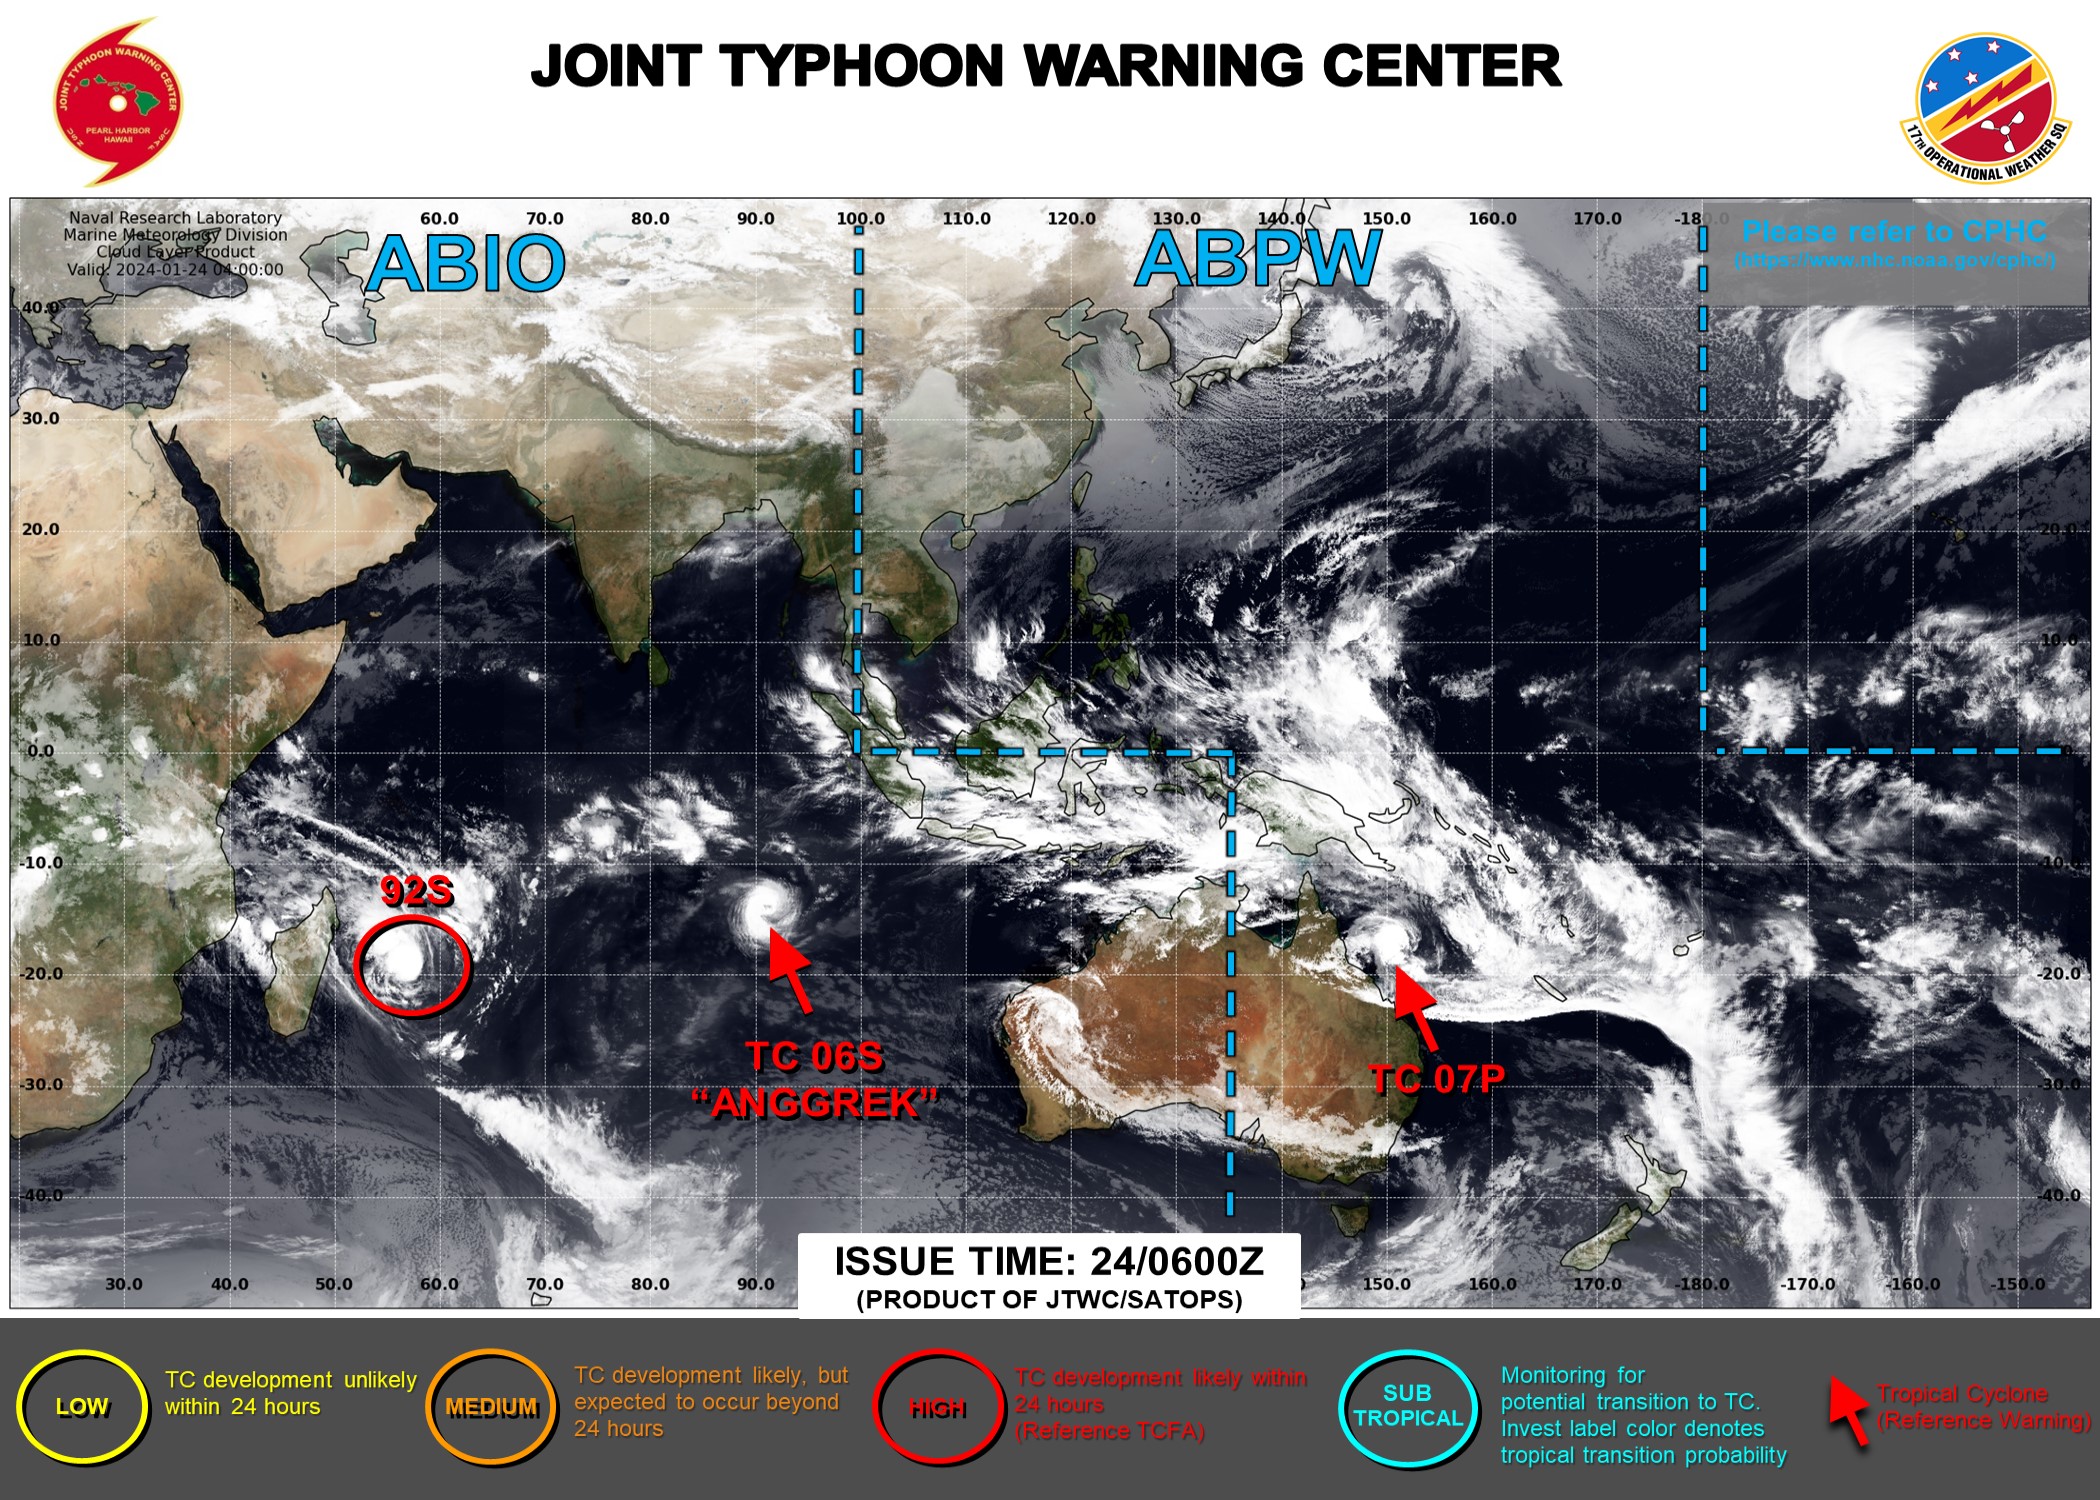 JTWC IS ISSUING 6HOURLY WARNINGS AND 3HOURLY SATELLITE BULLETINS TC 07P. 12HOURLY WARNINGS AND 3HOURLY SATELLITE BULLETINS ARE ISSUED ON TC 06S. 3HOURLY SATELLITE BULLETINS ARE ISSUED ON INVEST 92S.